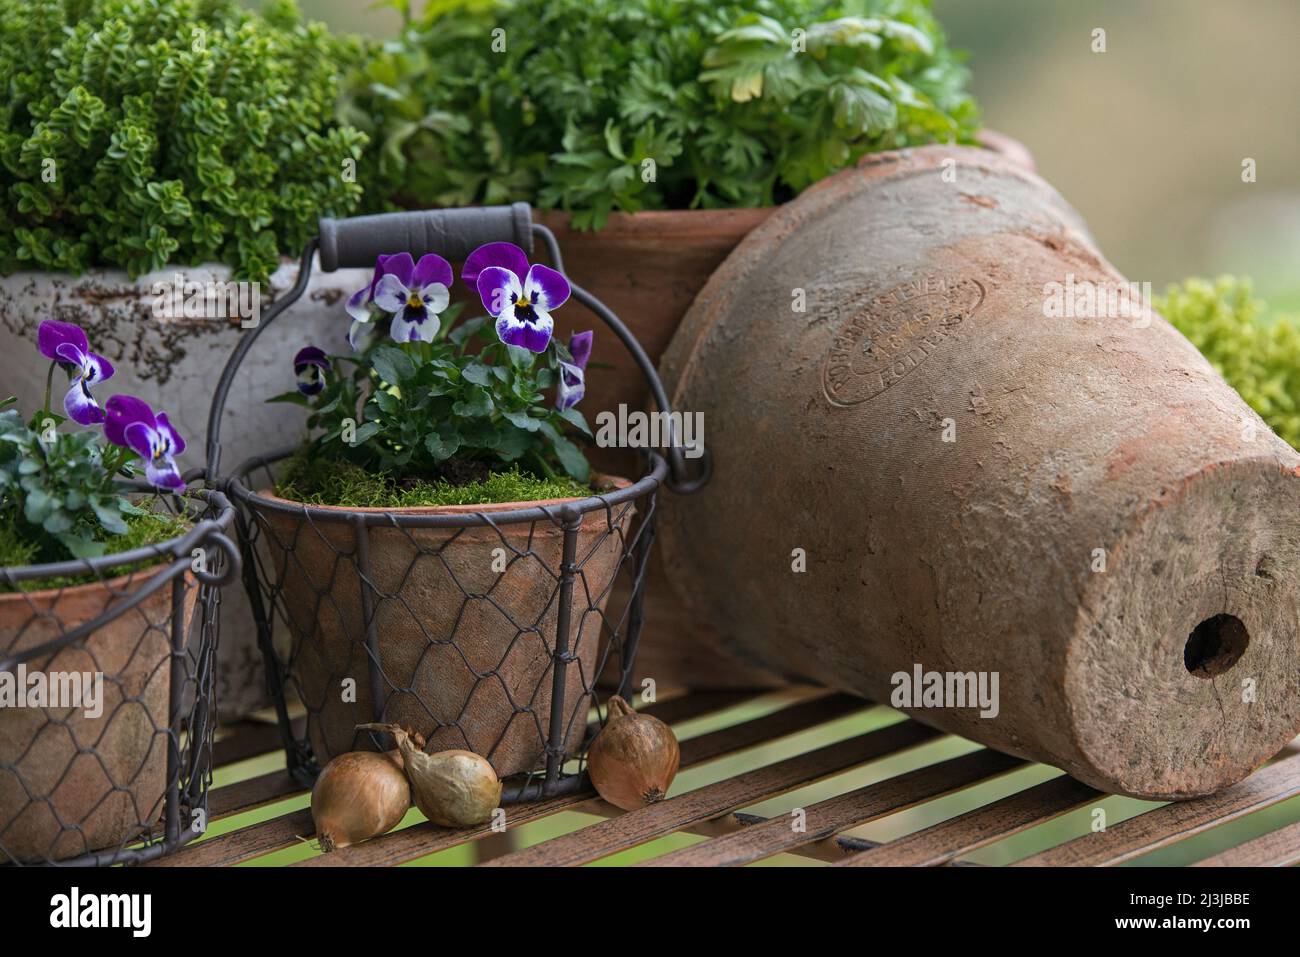 Pots with horned violets (Viola cornuta) and herbs stand on a table Stock Photo